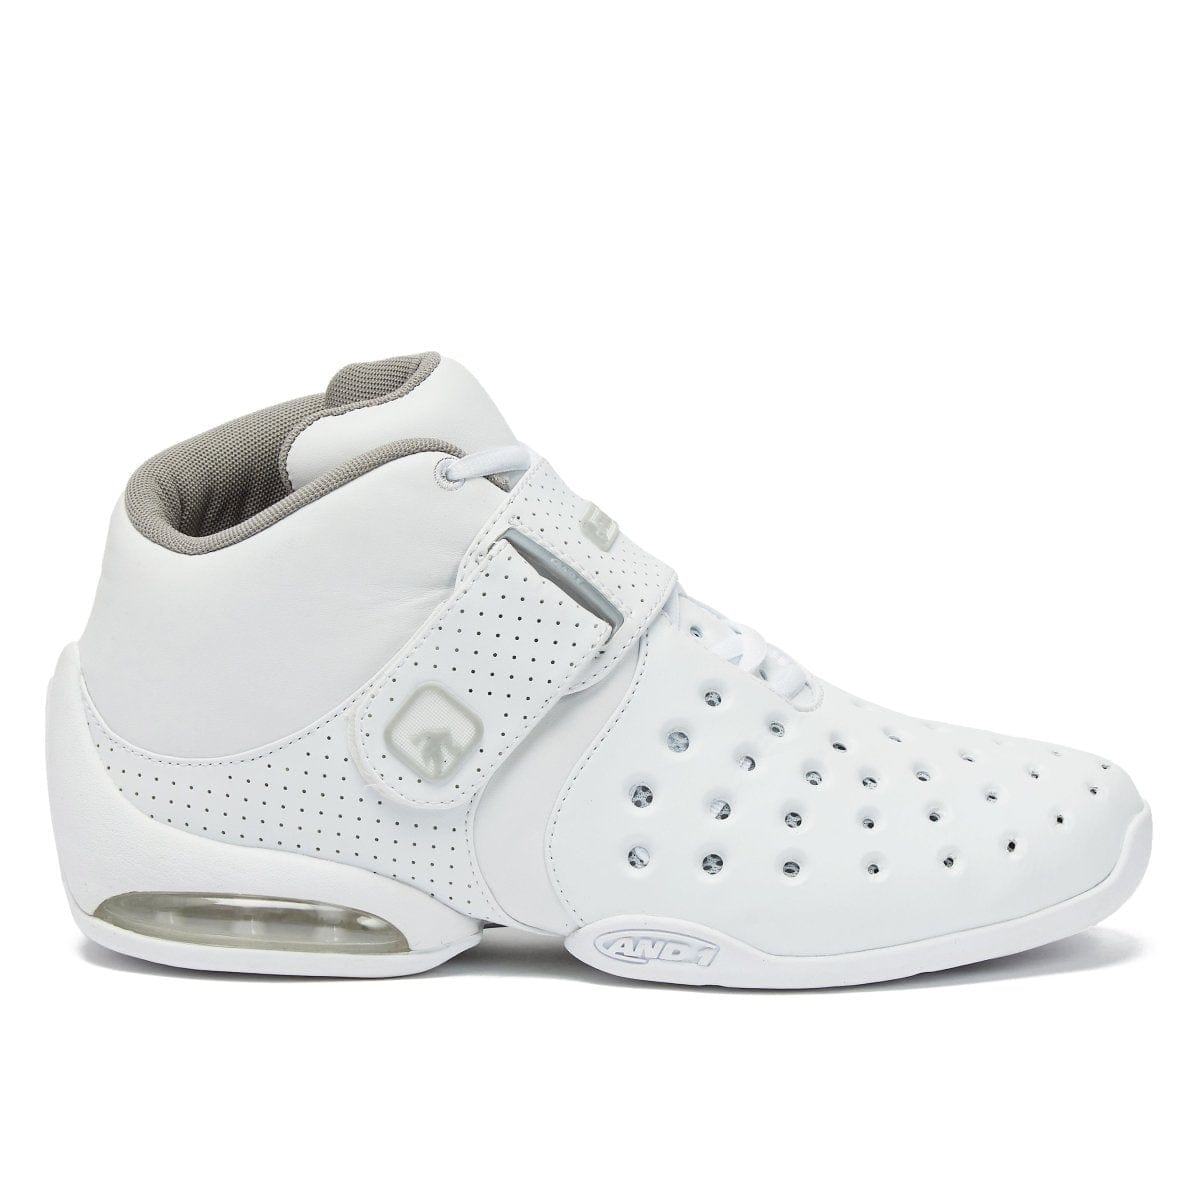 White Basketball Shoes - Buy White Basketball Shoes online in India